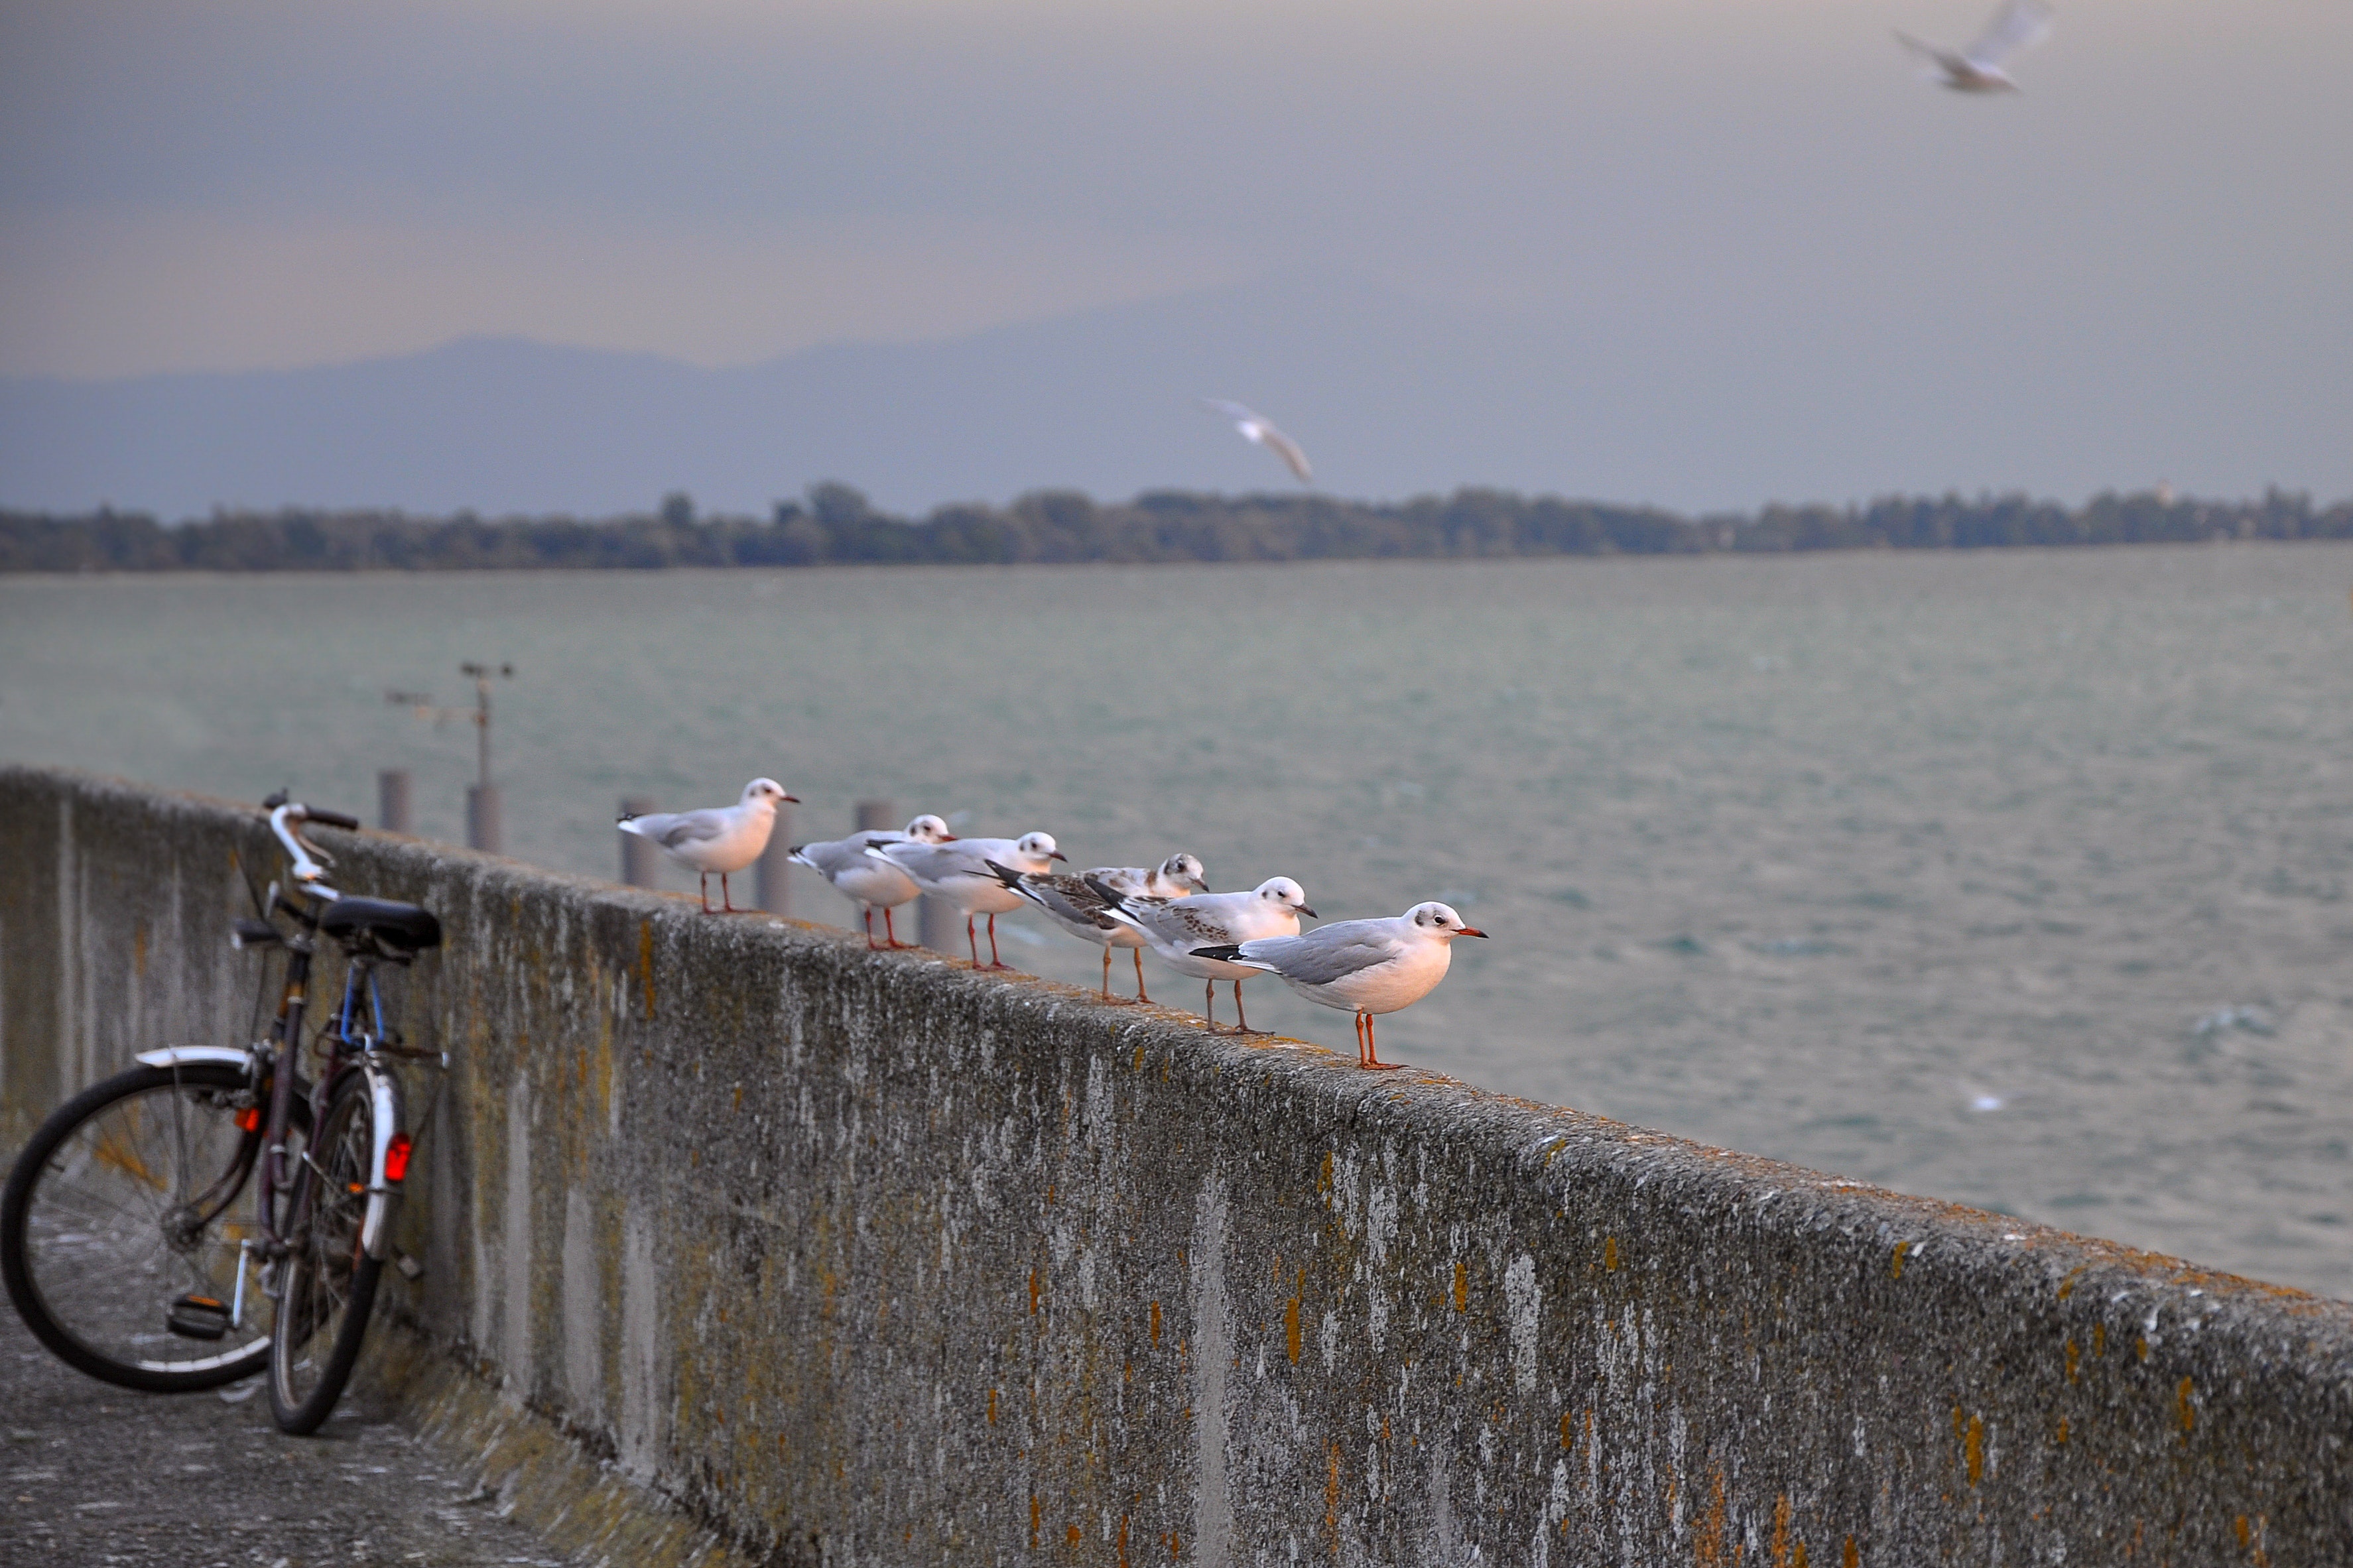 White and grey birds on concrete barrier near body of water photo